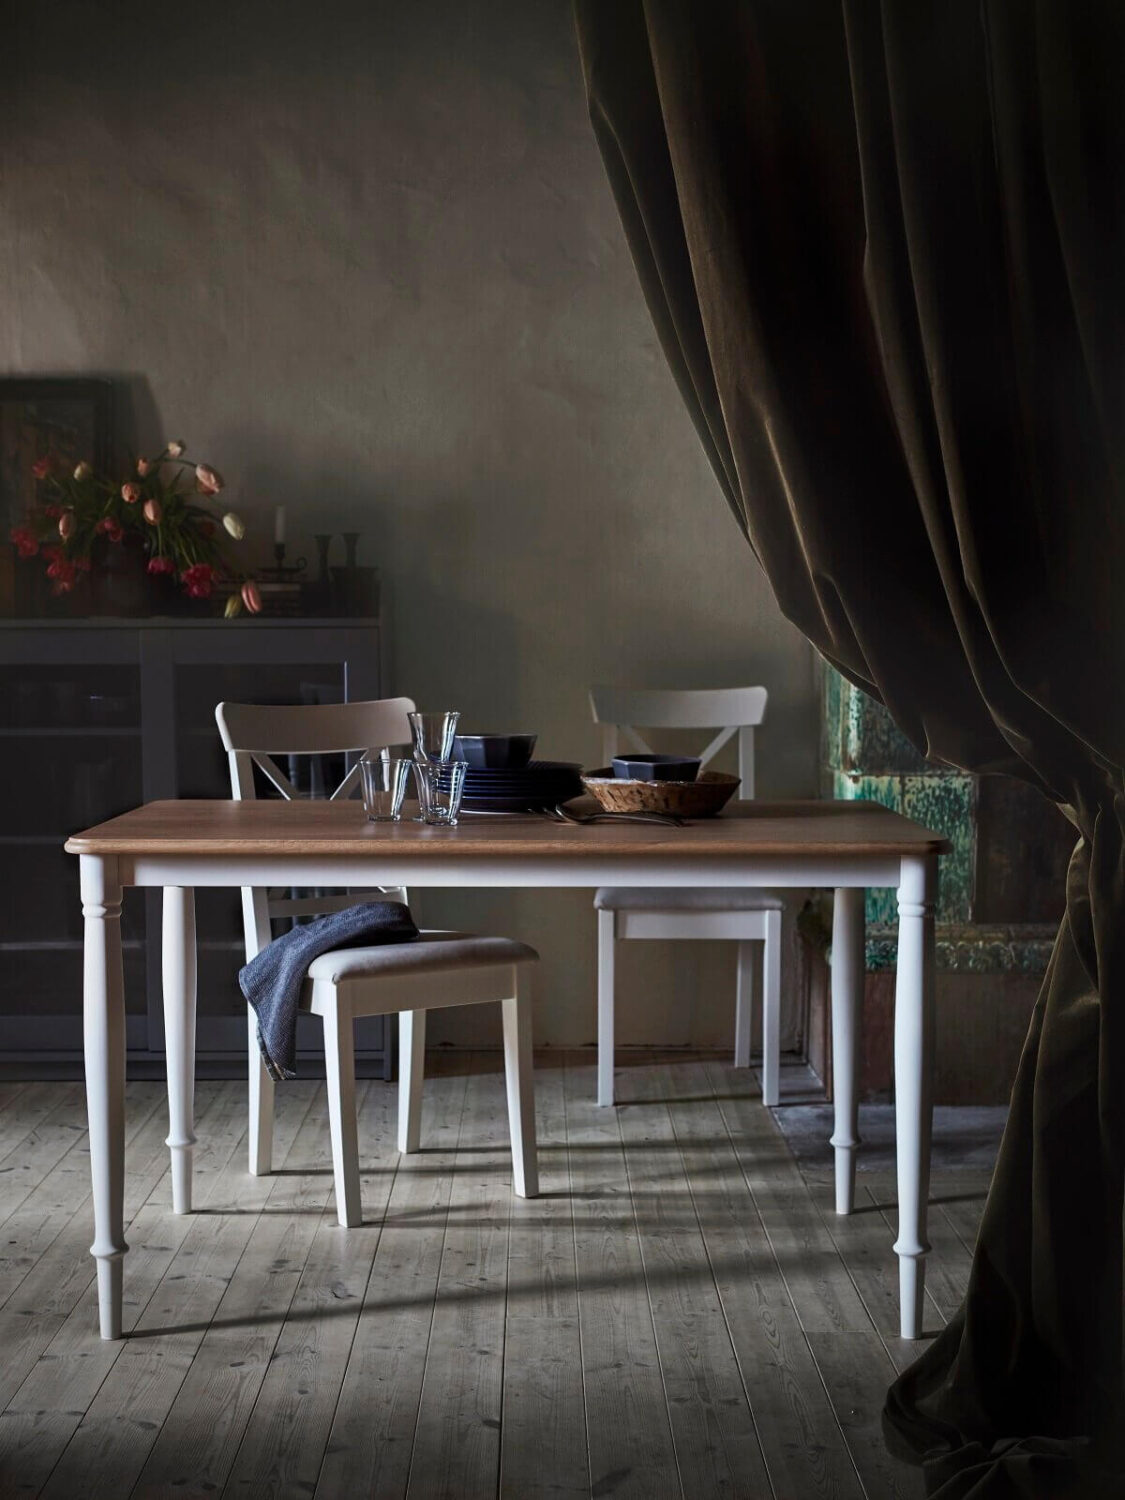 ANewIKEACollectionInspiredbyDutchMasterPainters TheNordroom14 A New IKEA Collection Inspired by Dutch Master Painters